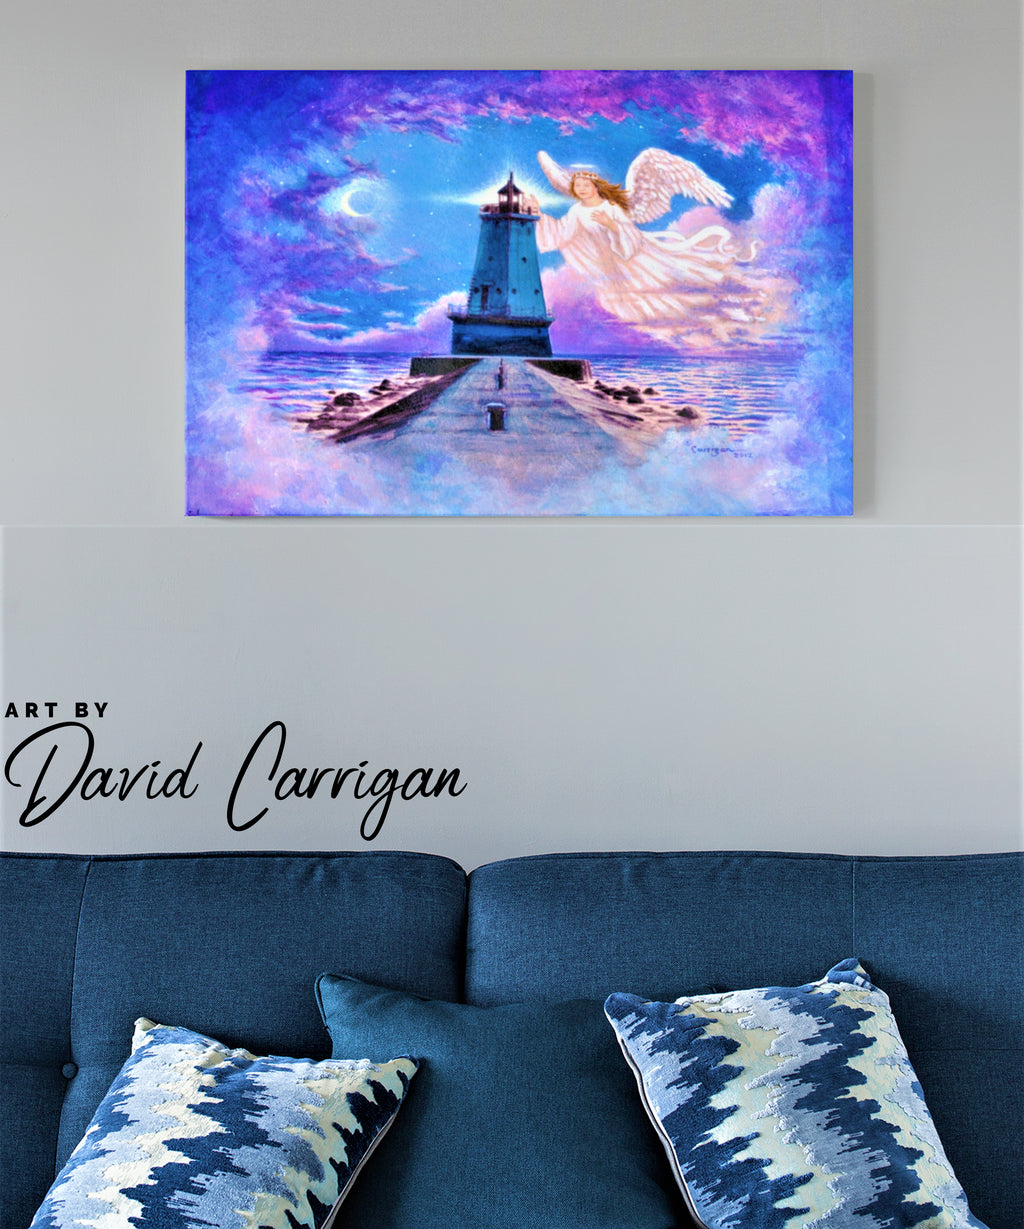 Beacon of Hope, Angel and Light House Landscape Canvas by David Carrigan.